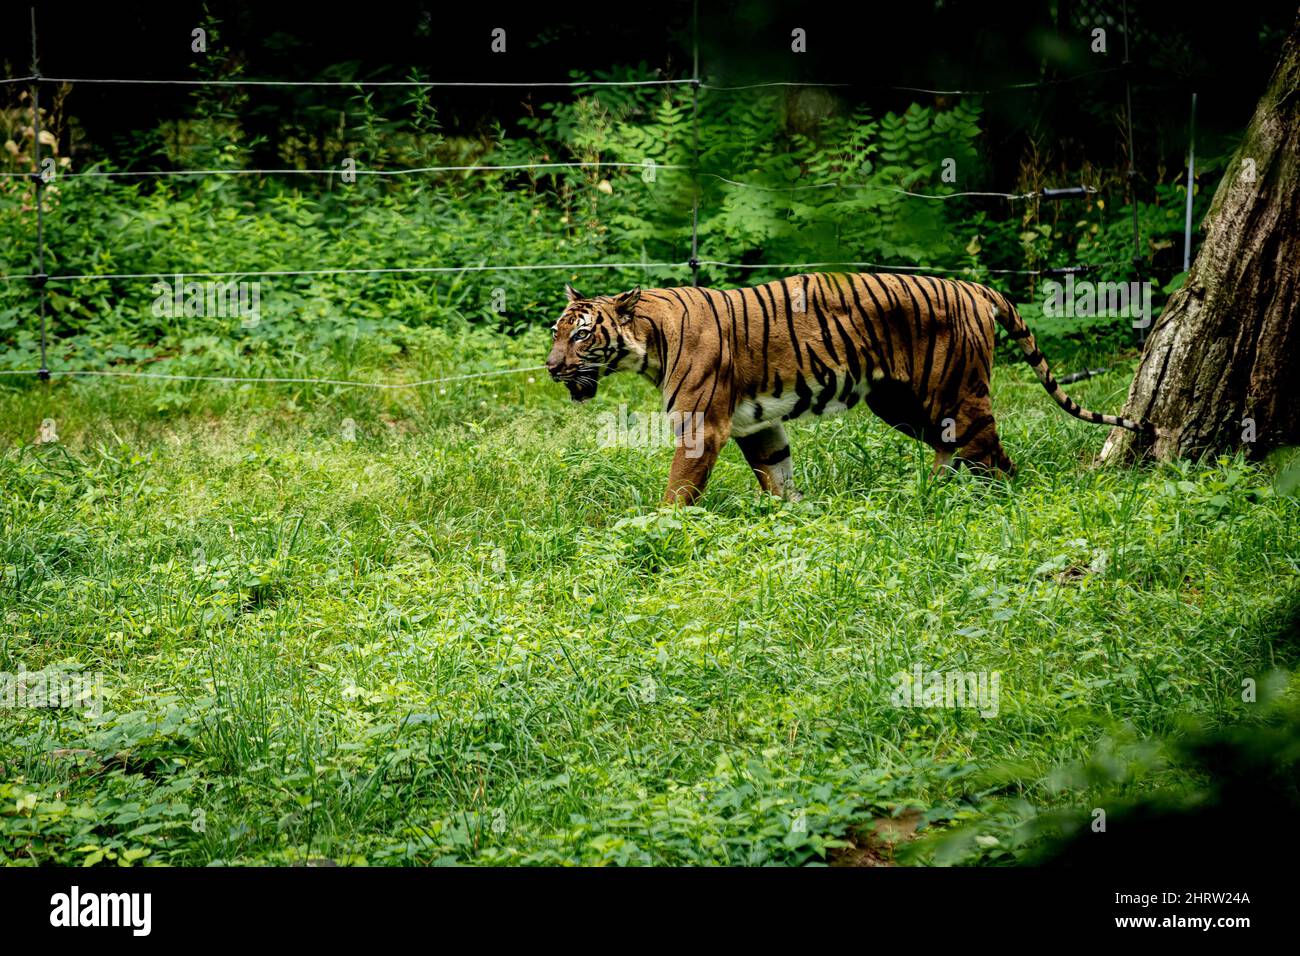 View of a Bengal tiger animal walking on green grass land in the forest Stock Photo